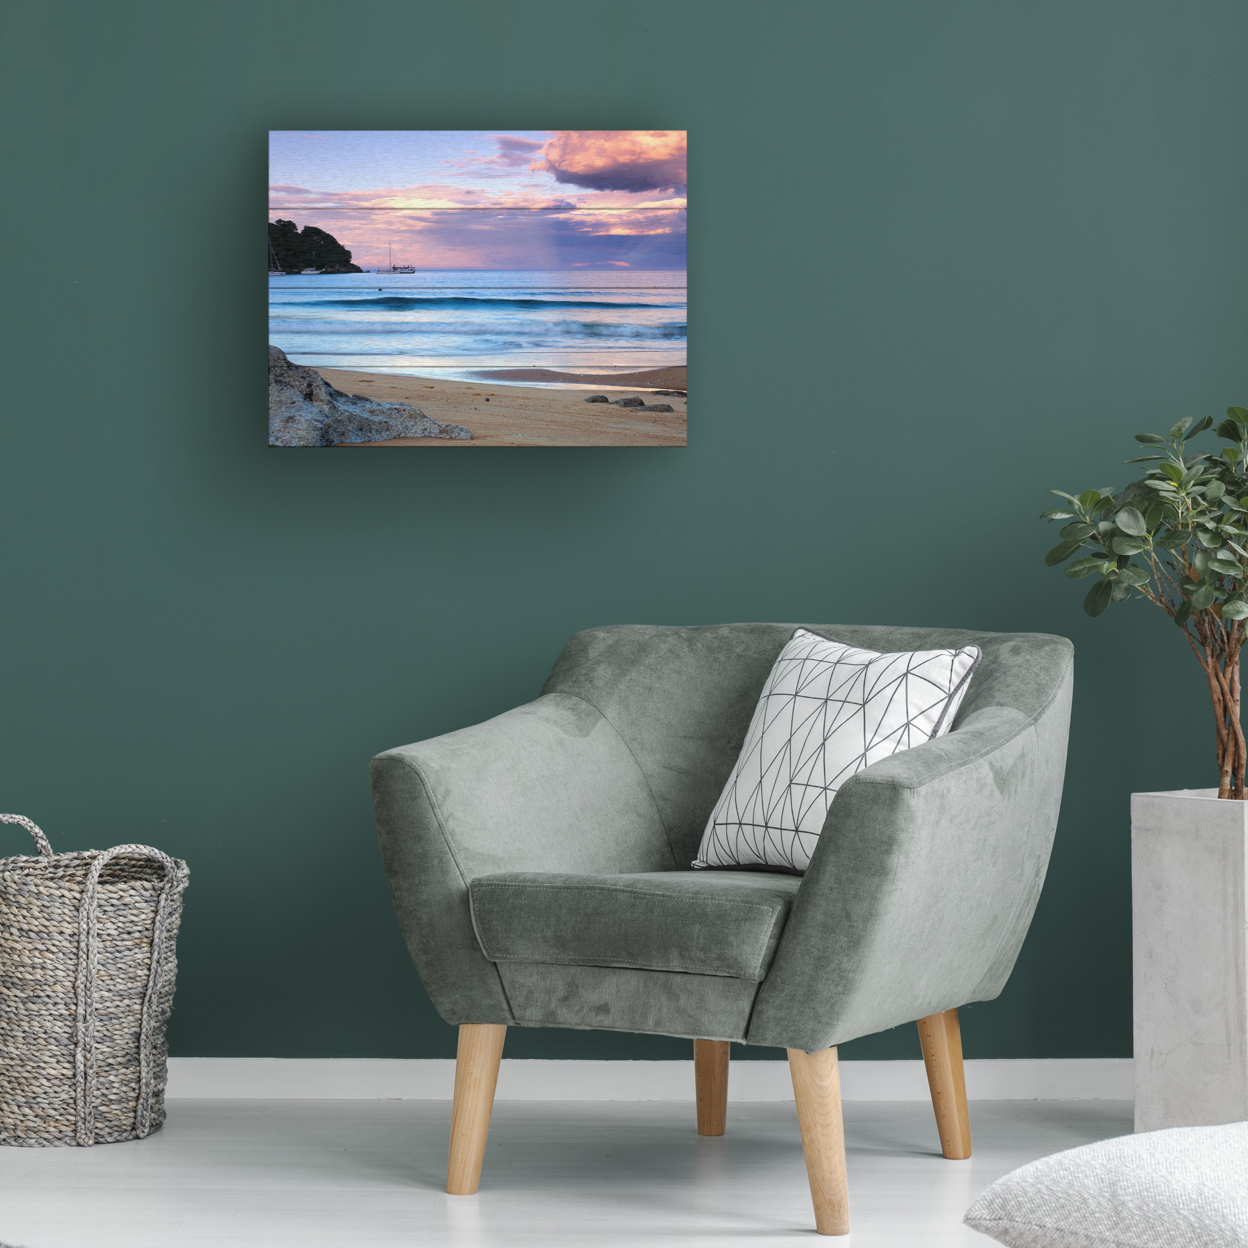 Wall Art 12 X 16 Inches Titled Kaiteriteri Sunset Ready To Hang Printed On Wooden Planks